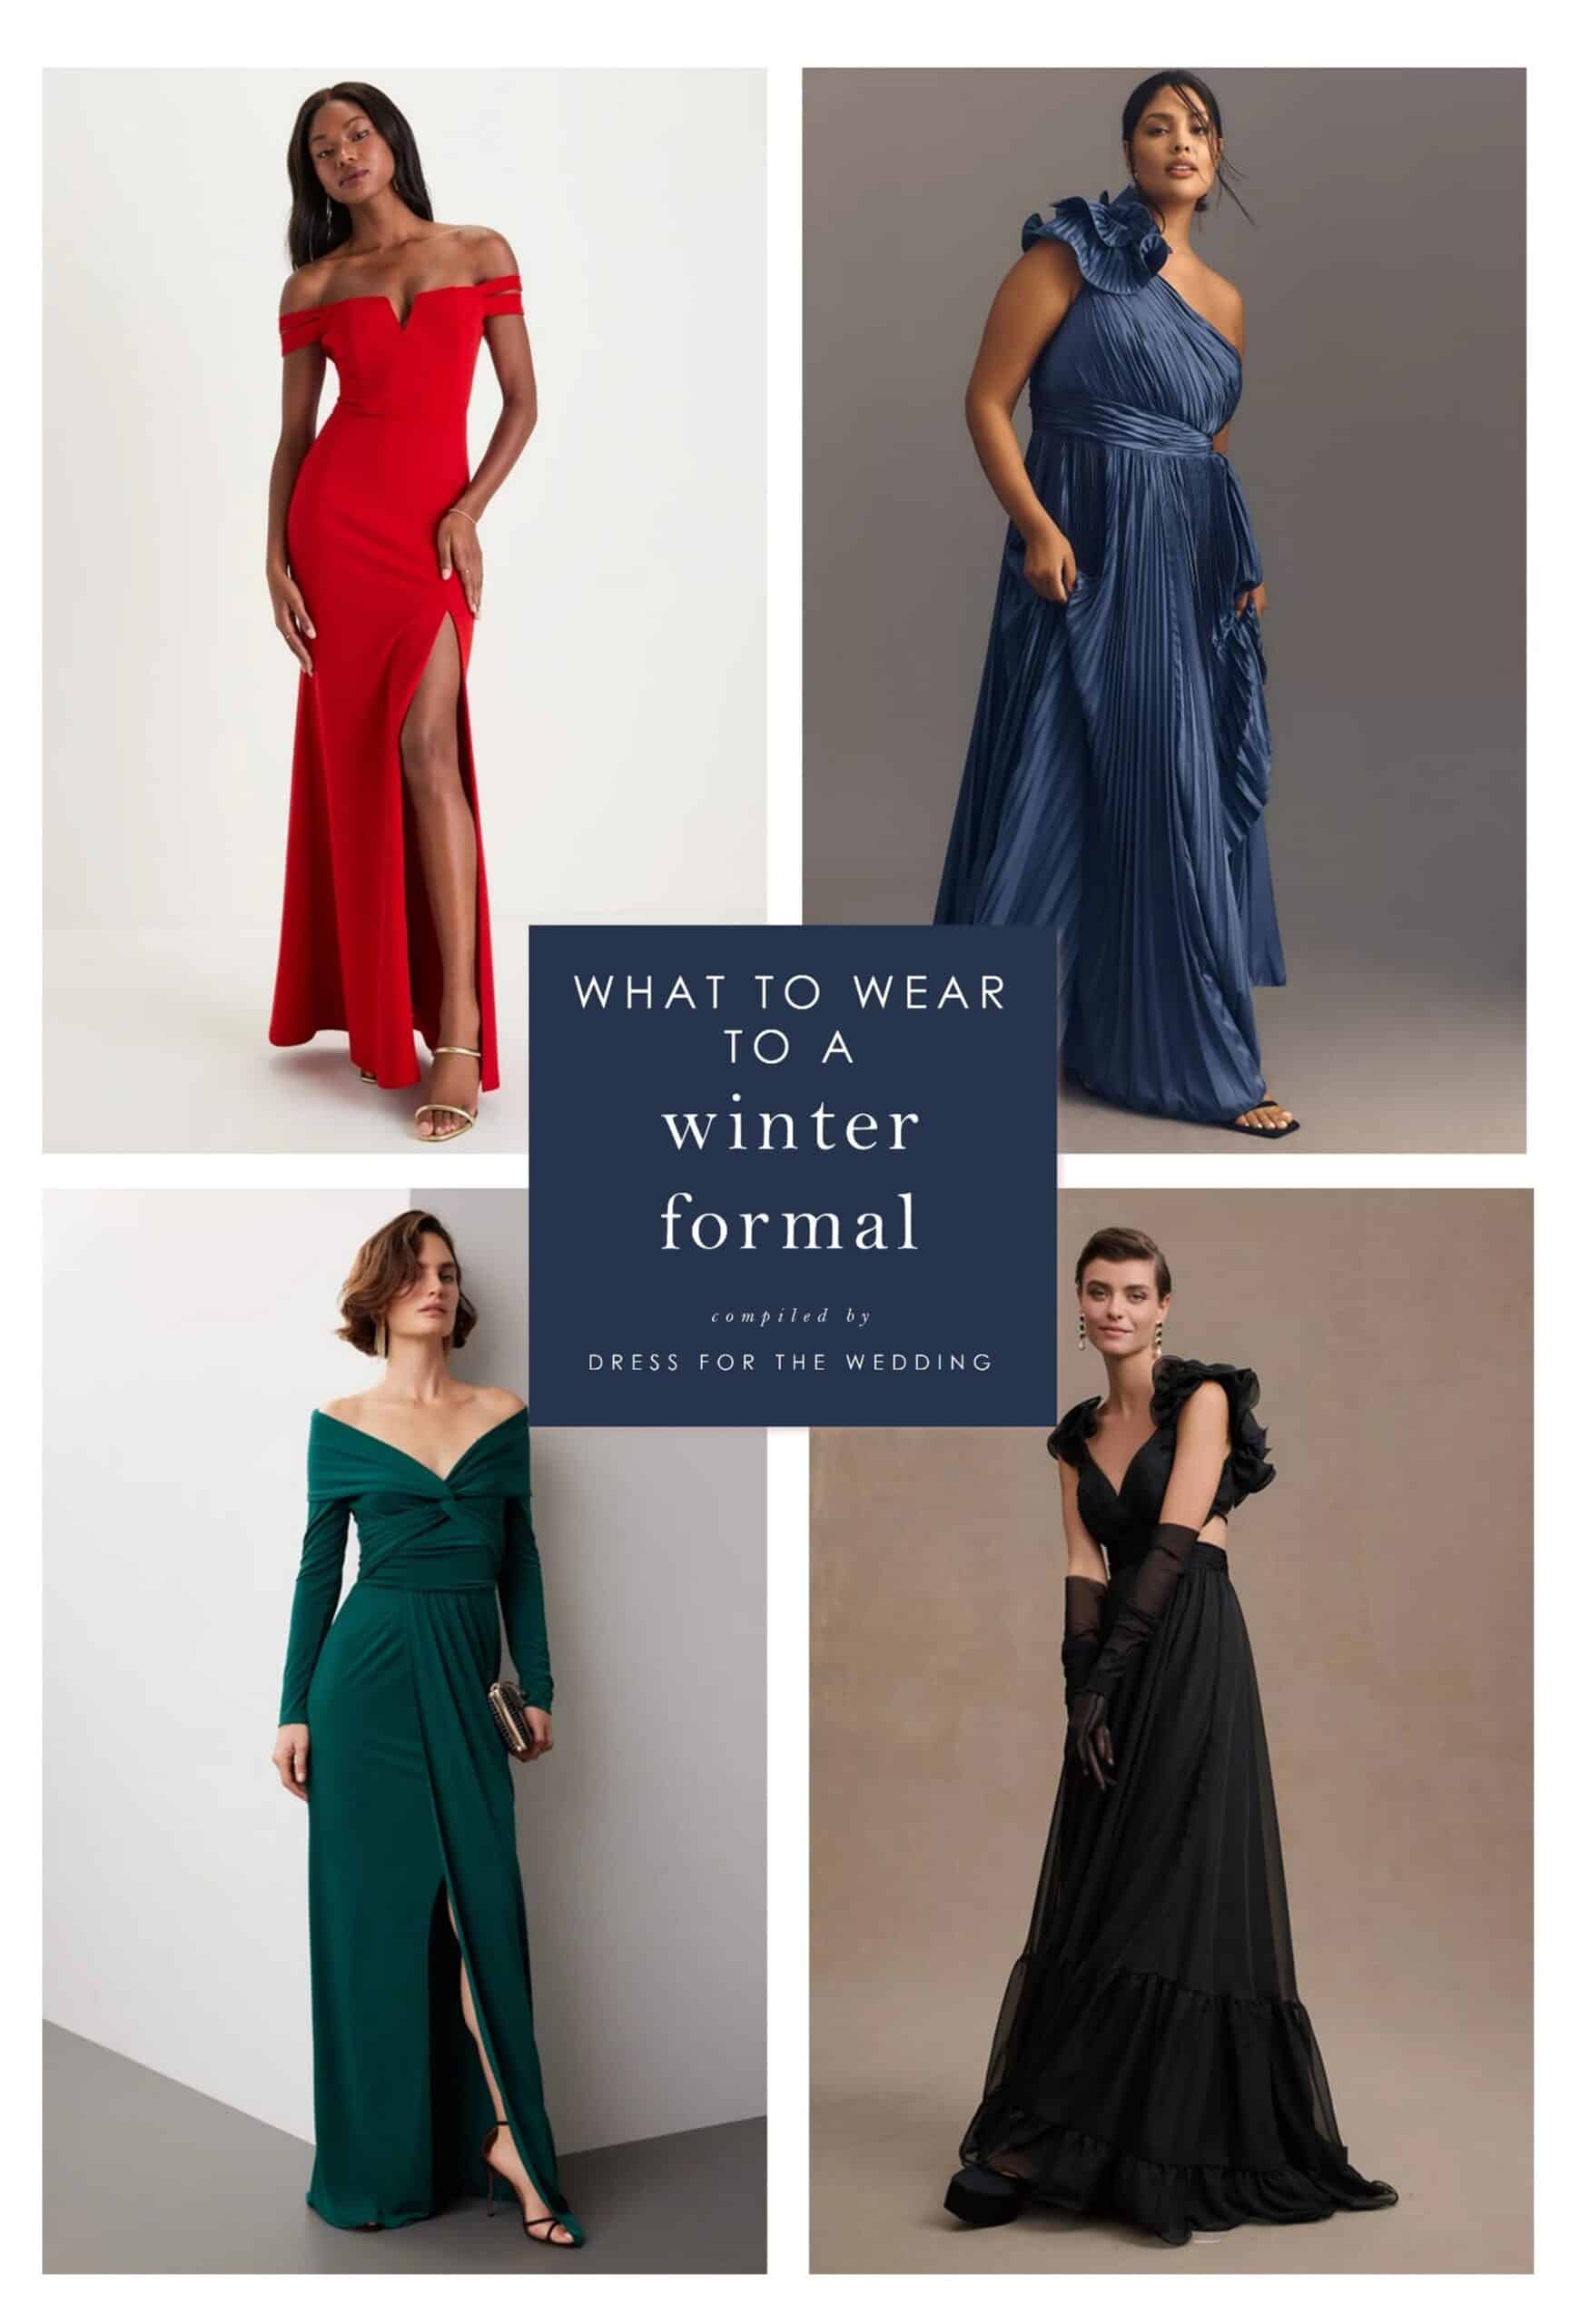 What to Wear to a Winter Formal Wedding or Event - Dress for the Wedding